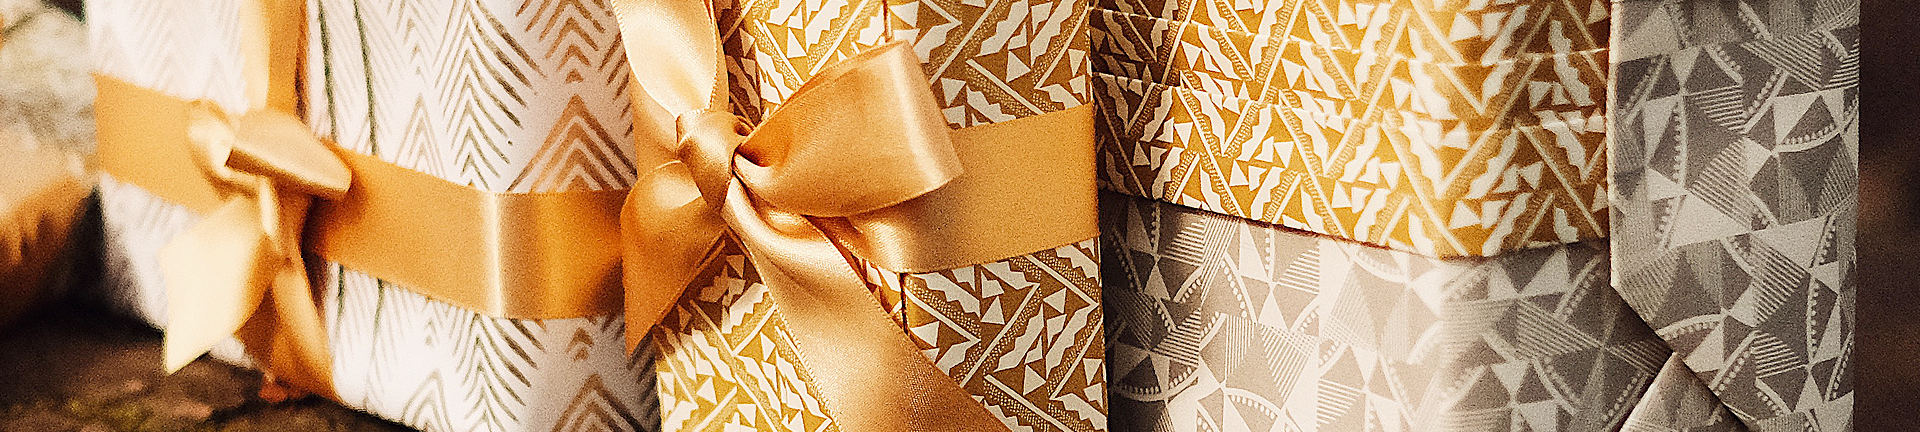 Gold and white gifts professionally wrapped in bow and eco-friendly paper